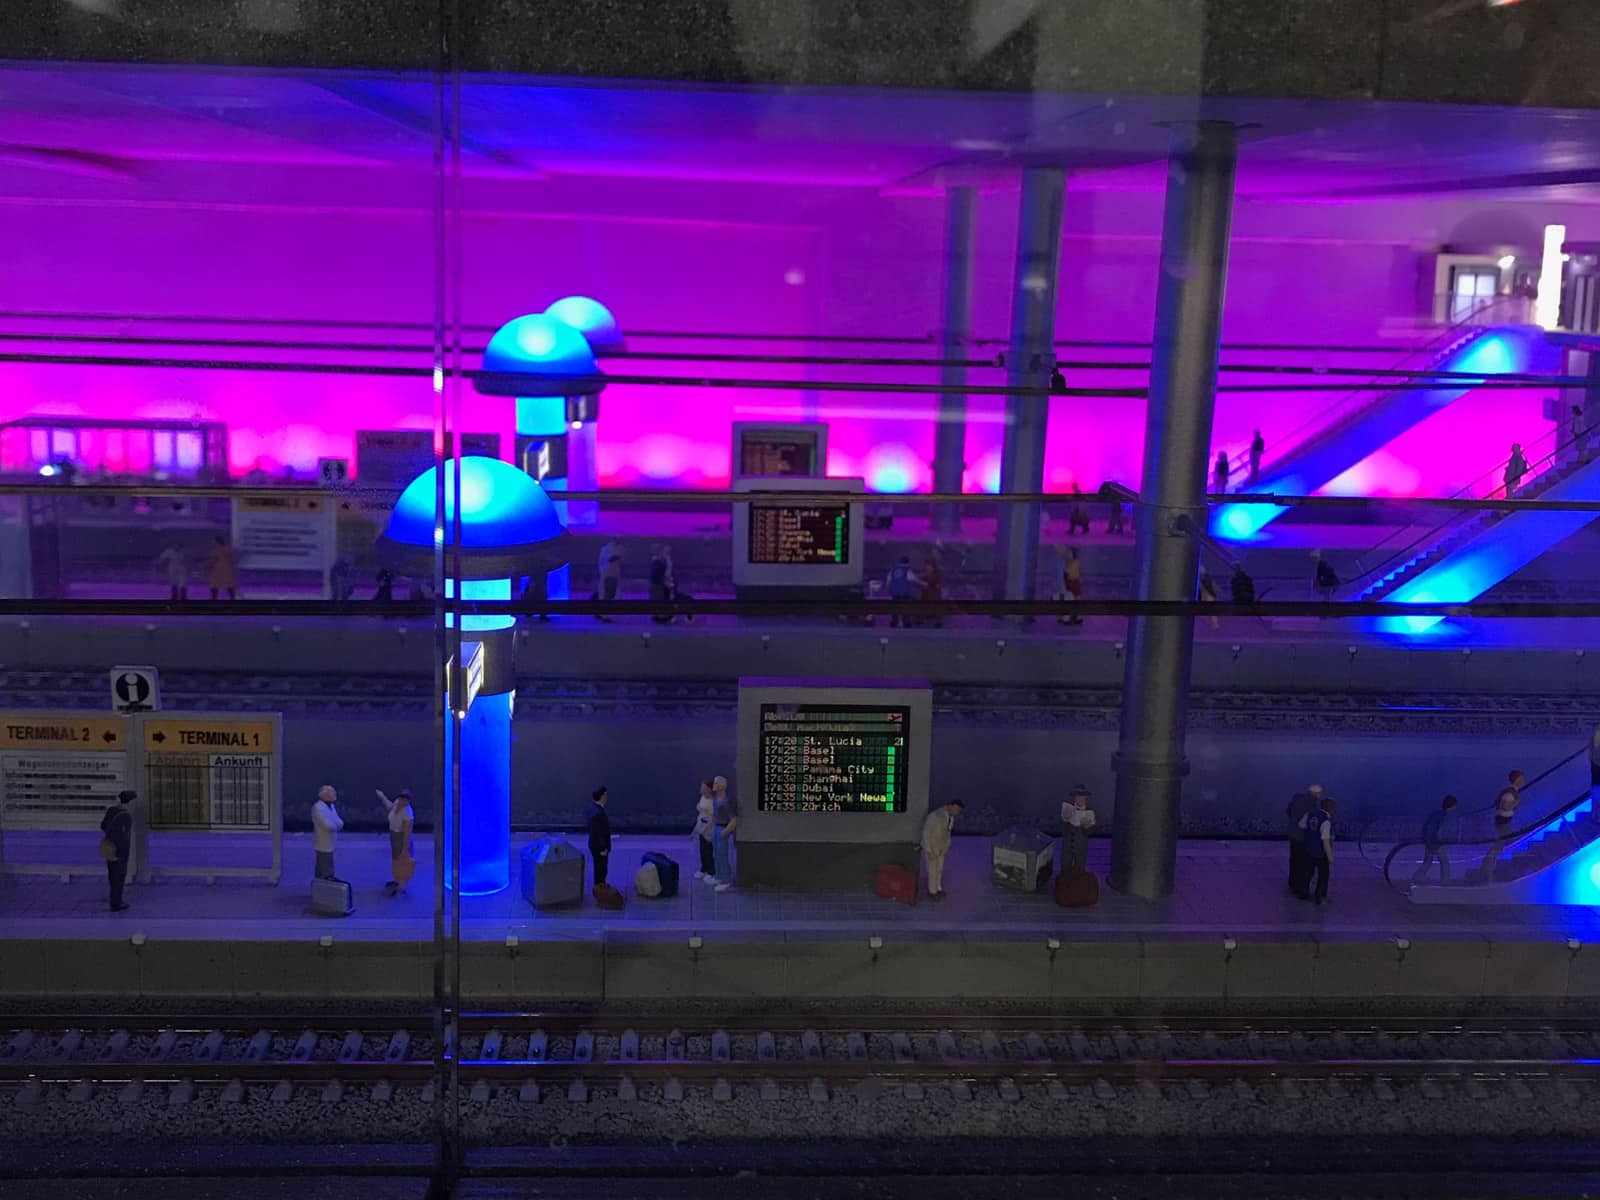 A miniature underground subway with miniature figurines waiting with baggage, and a LED board showing departure and arrival times